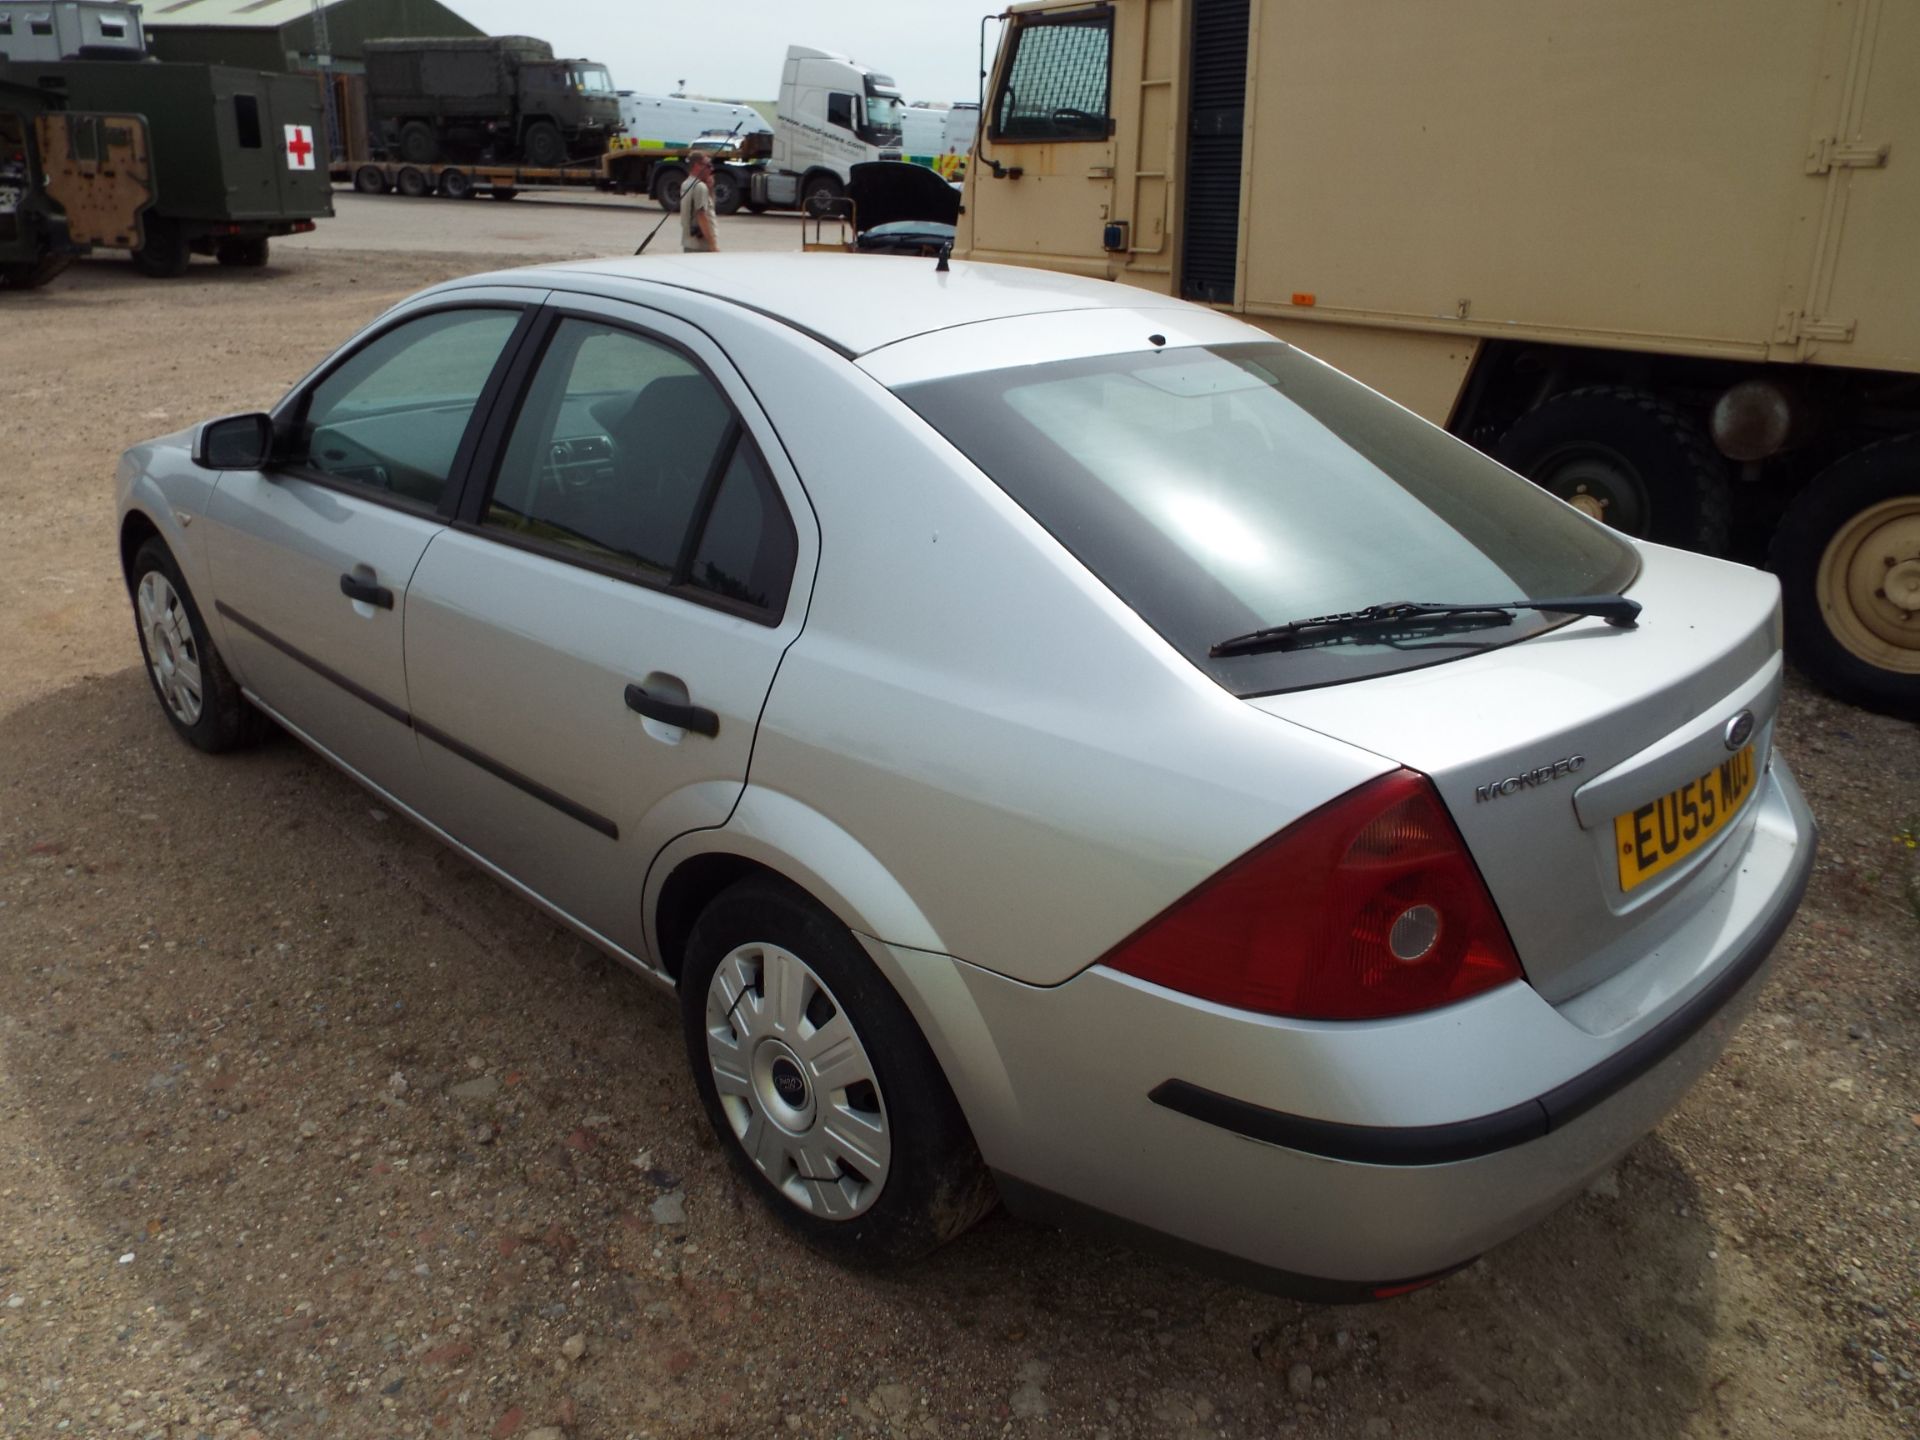 Ford Mondeo LX 2.0 TDCi - Image 5 of 17